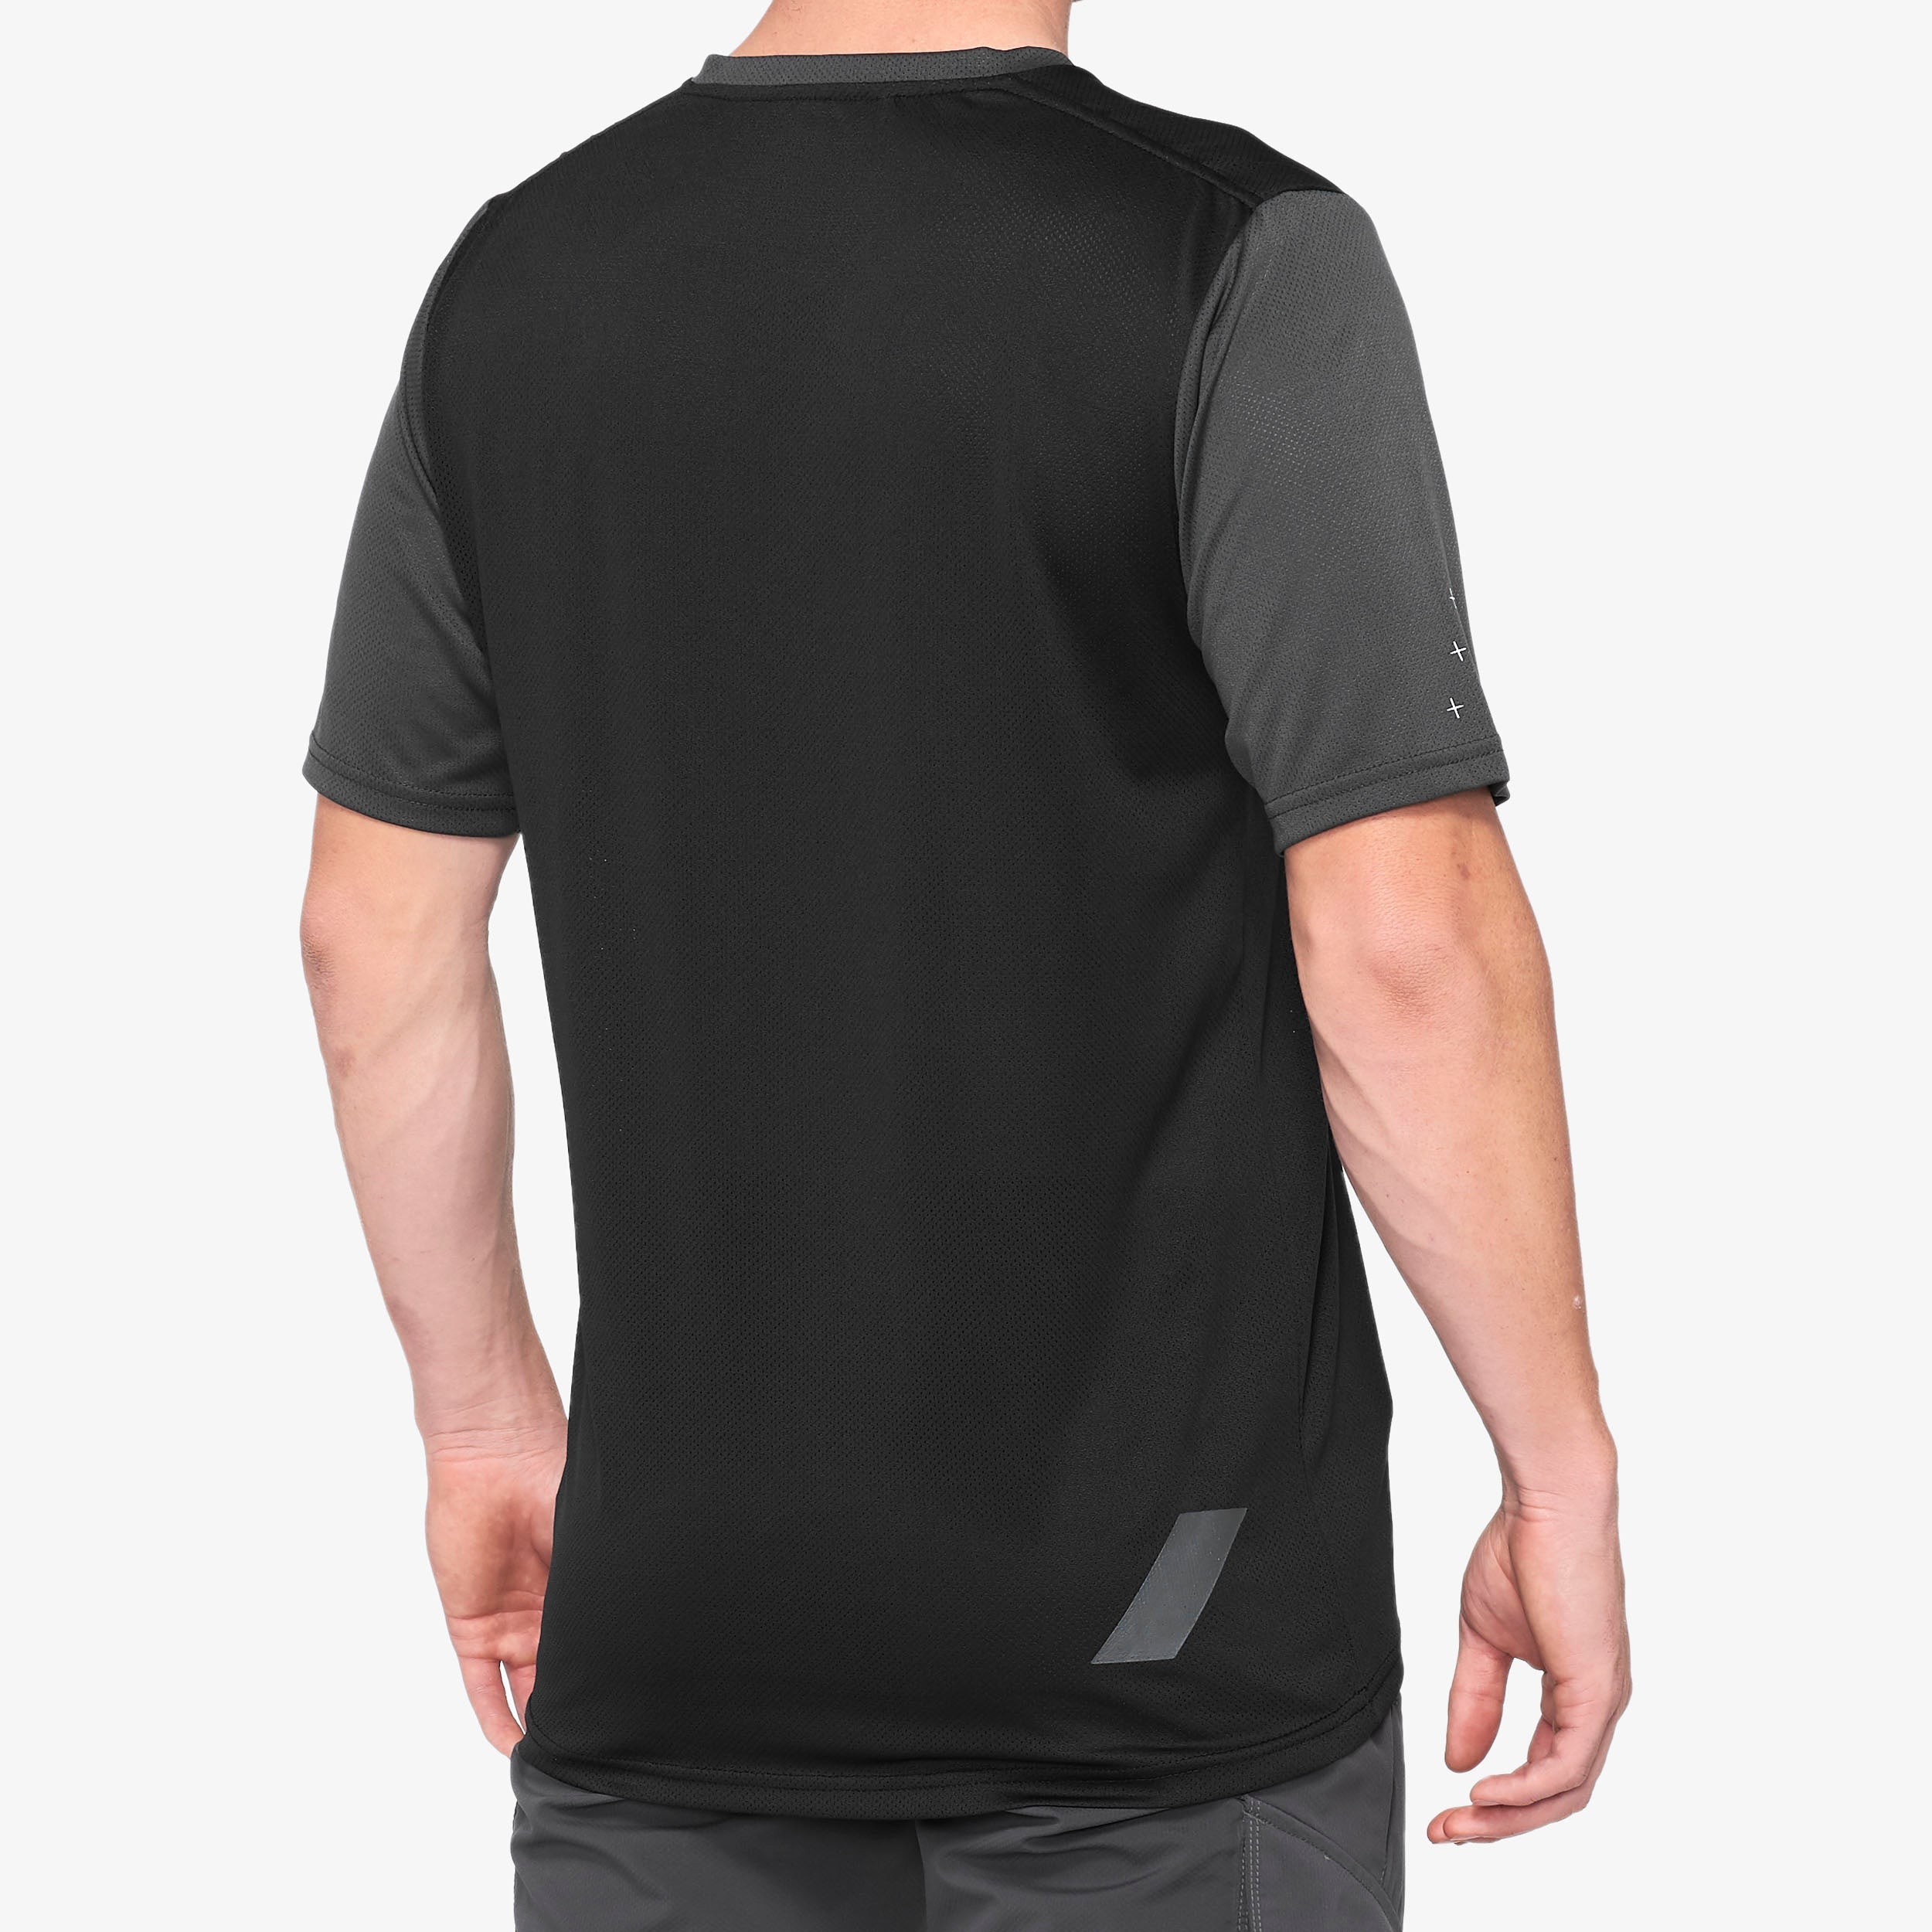 RIDECAMP Short Sleeve Jersey Black/Charcoal